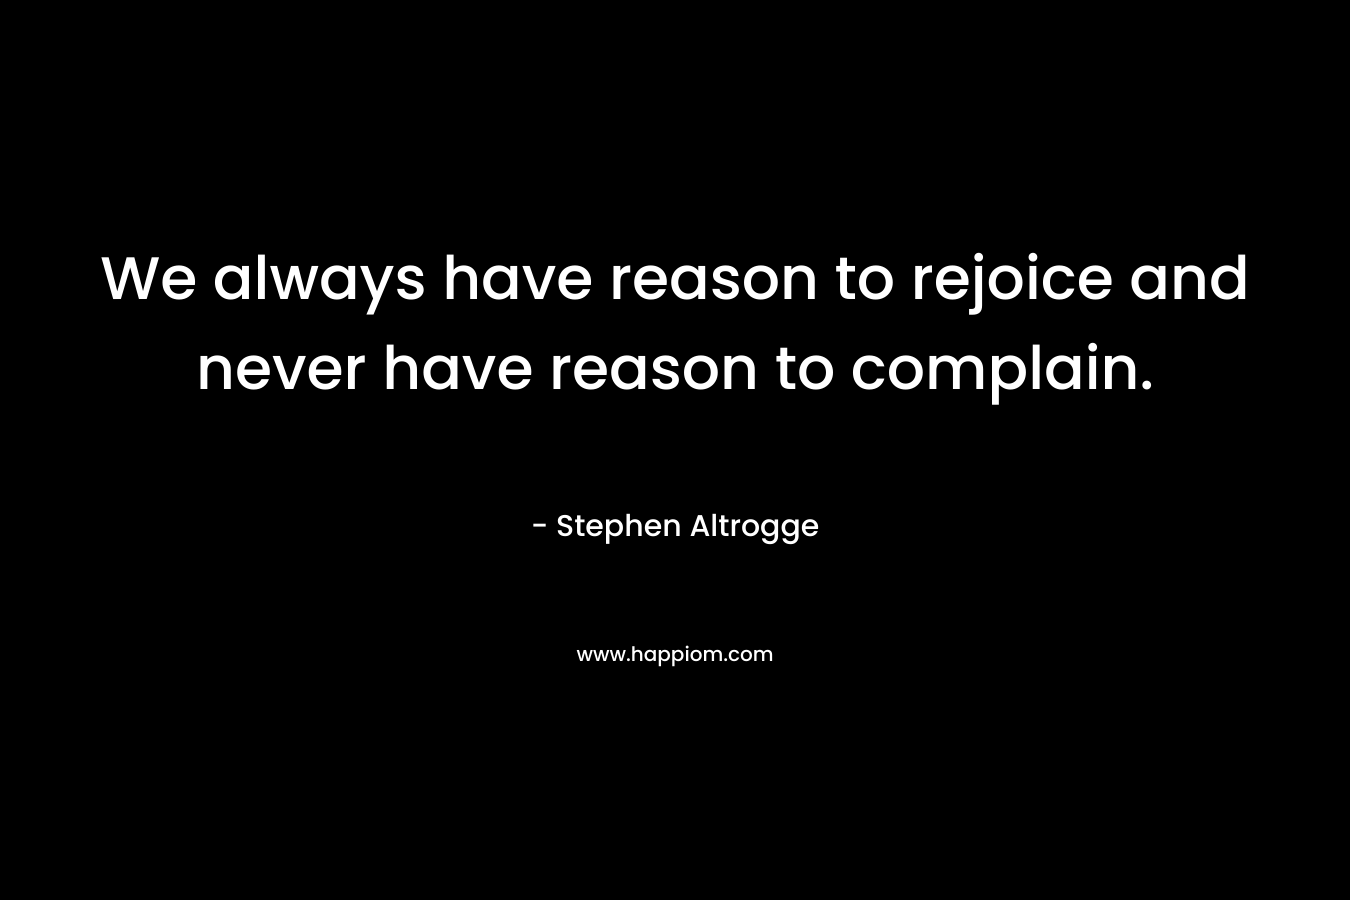 We always have reason to rejoice and never have reason to complain.